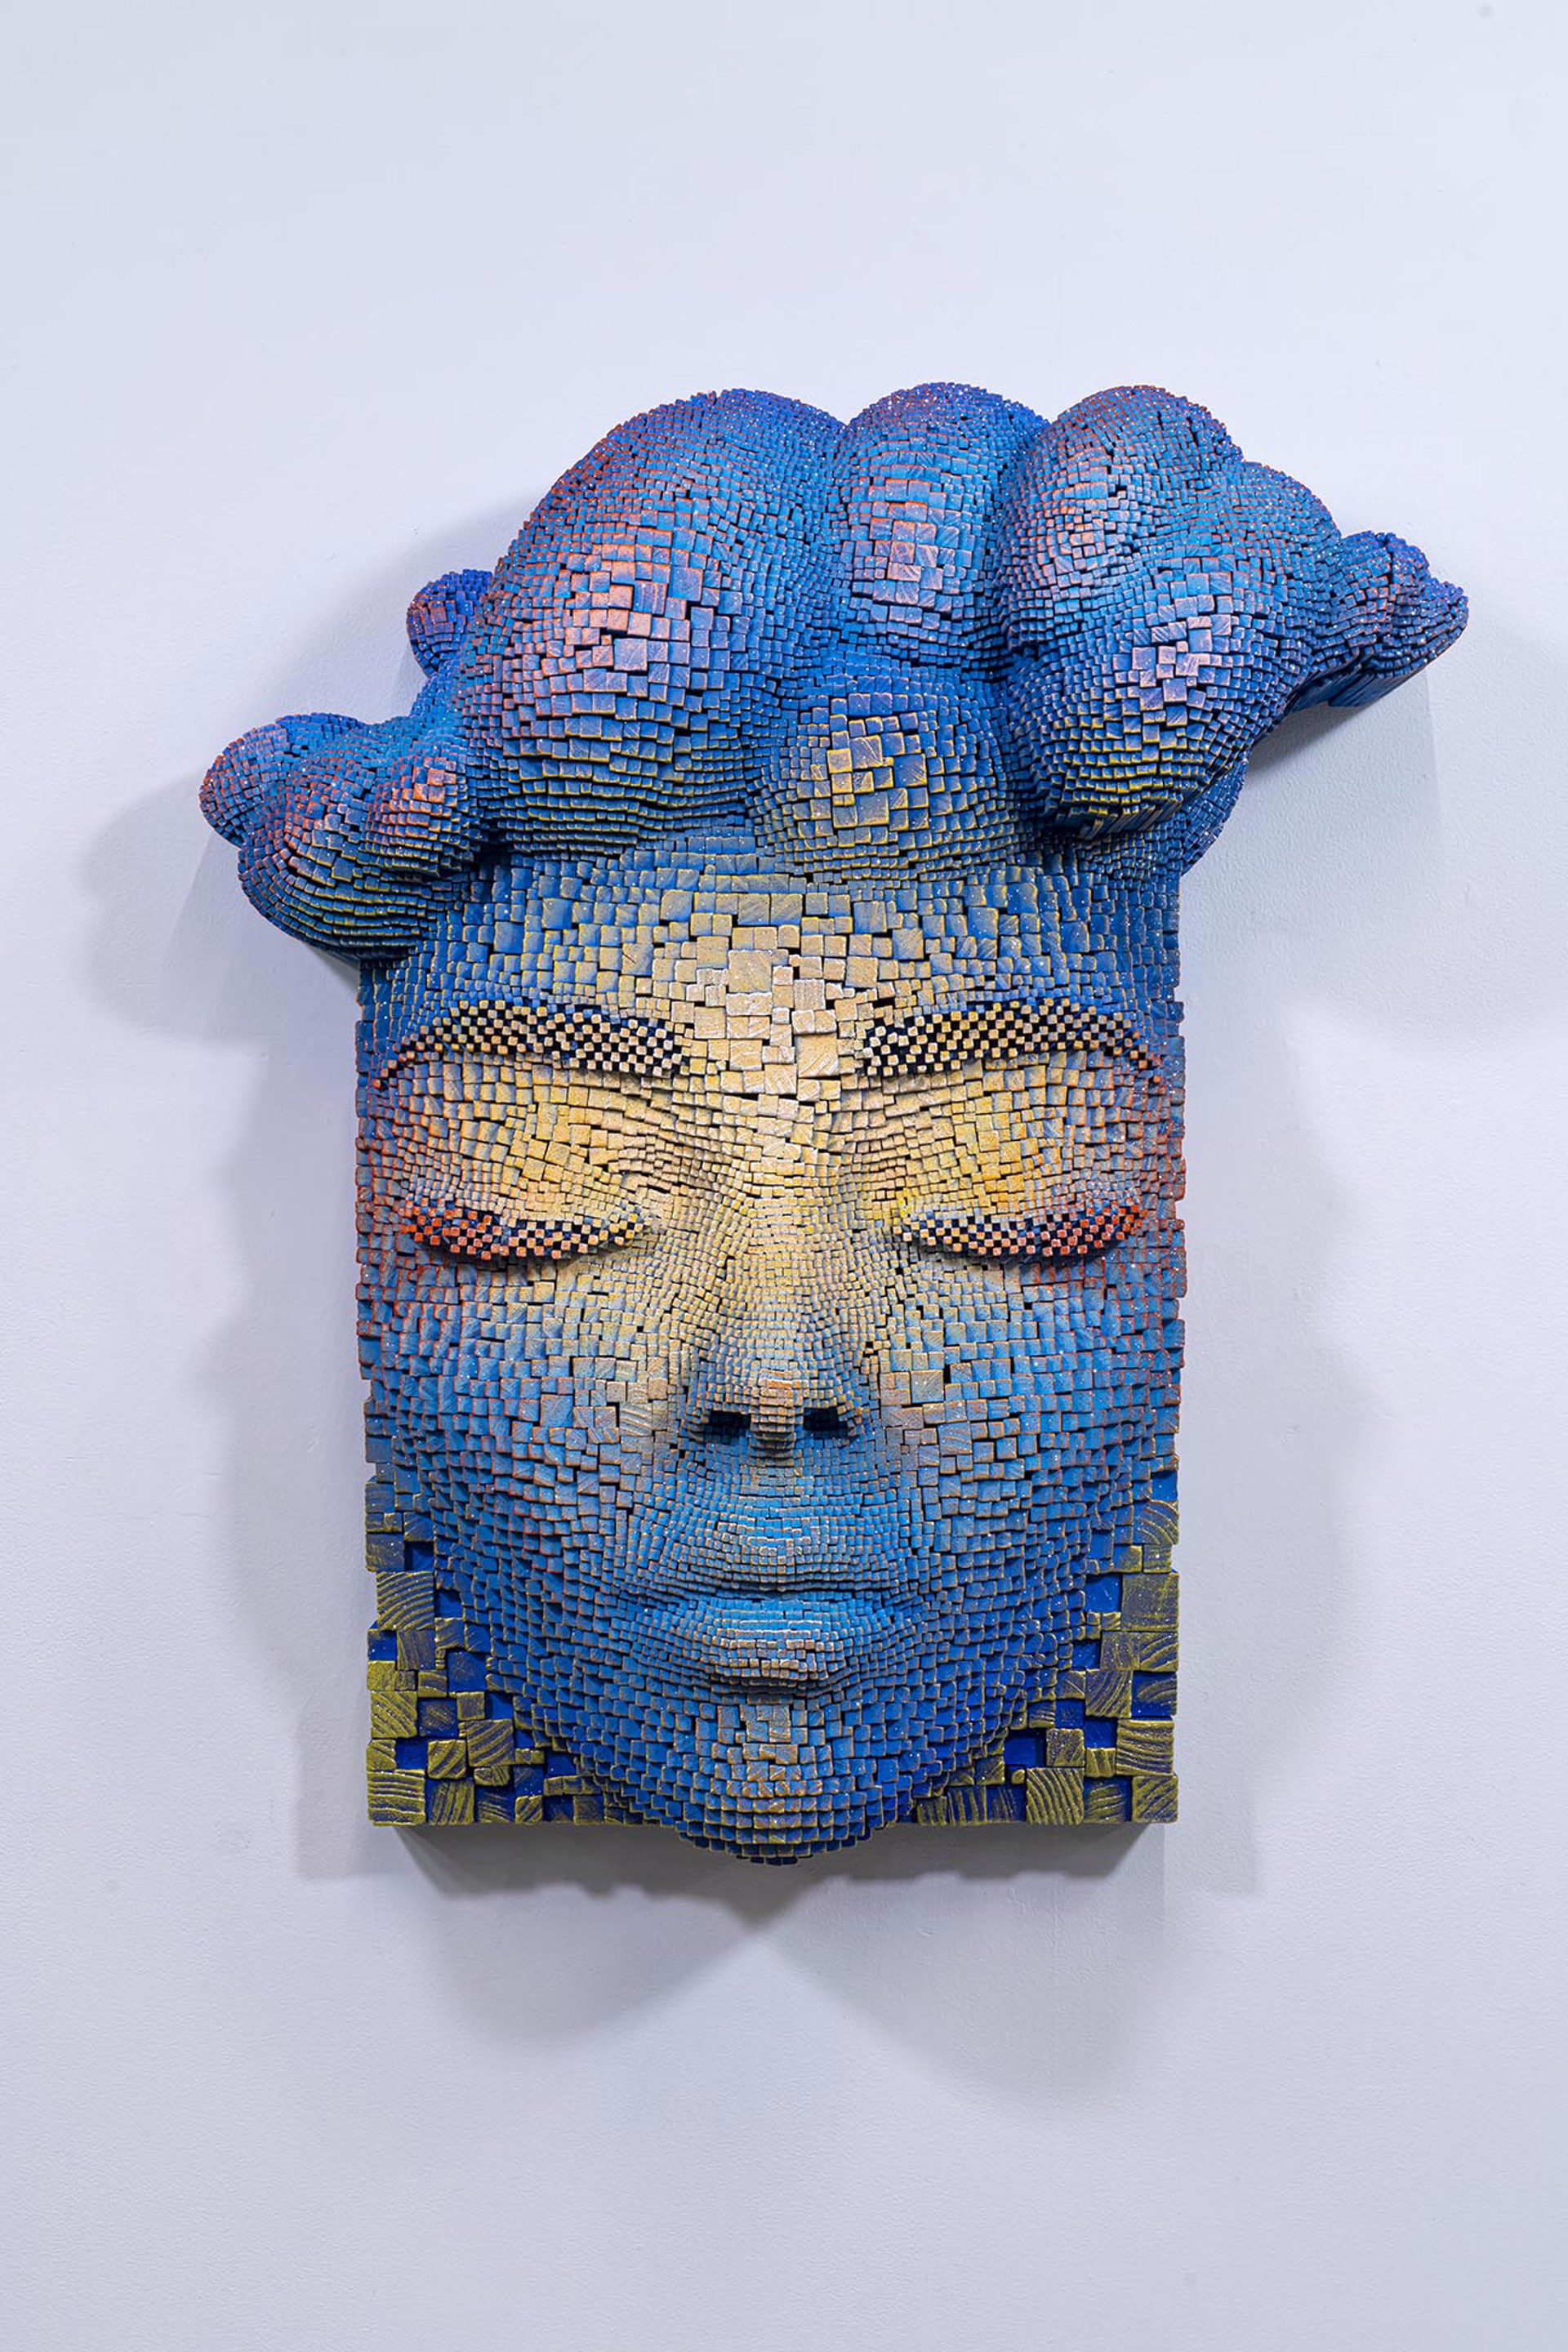 Head in the Clouds by Gil Bruvel